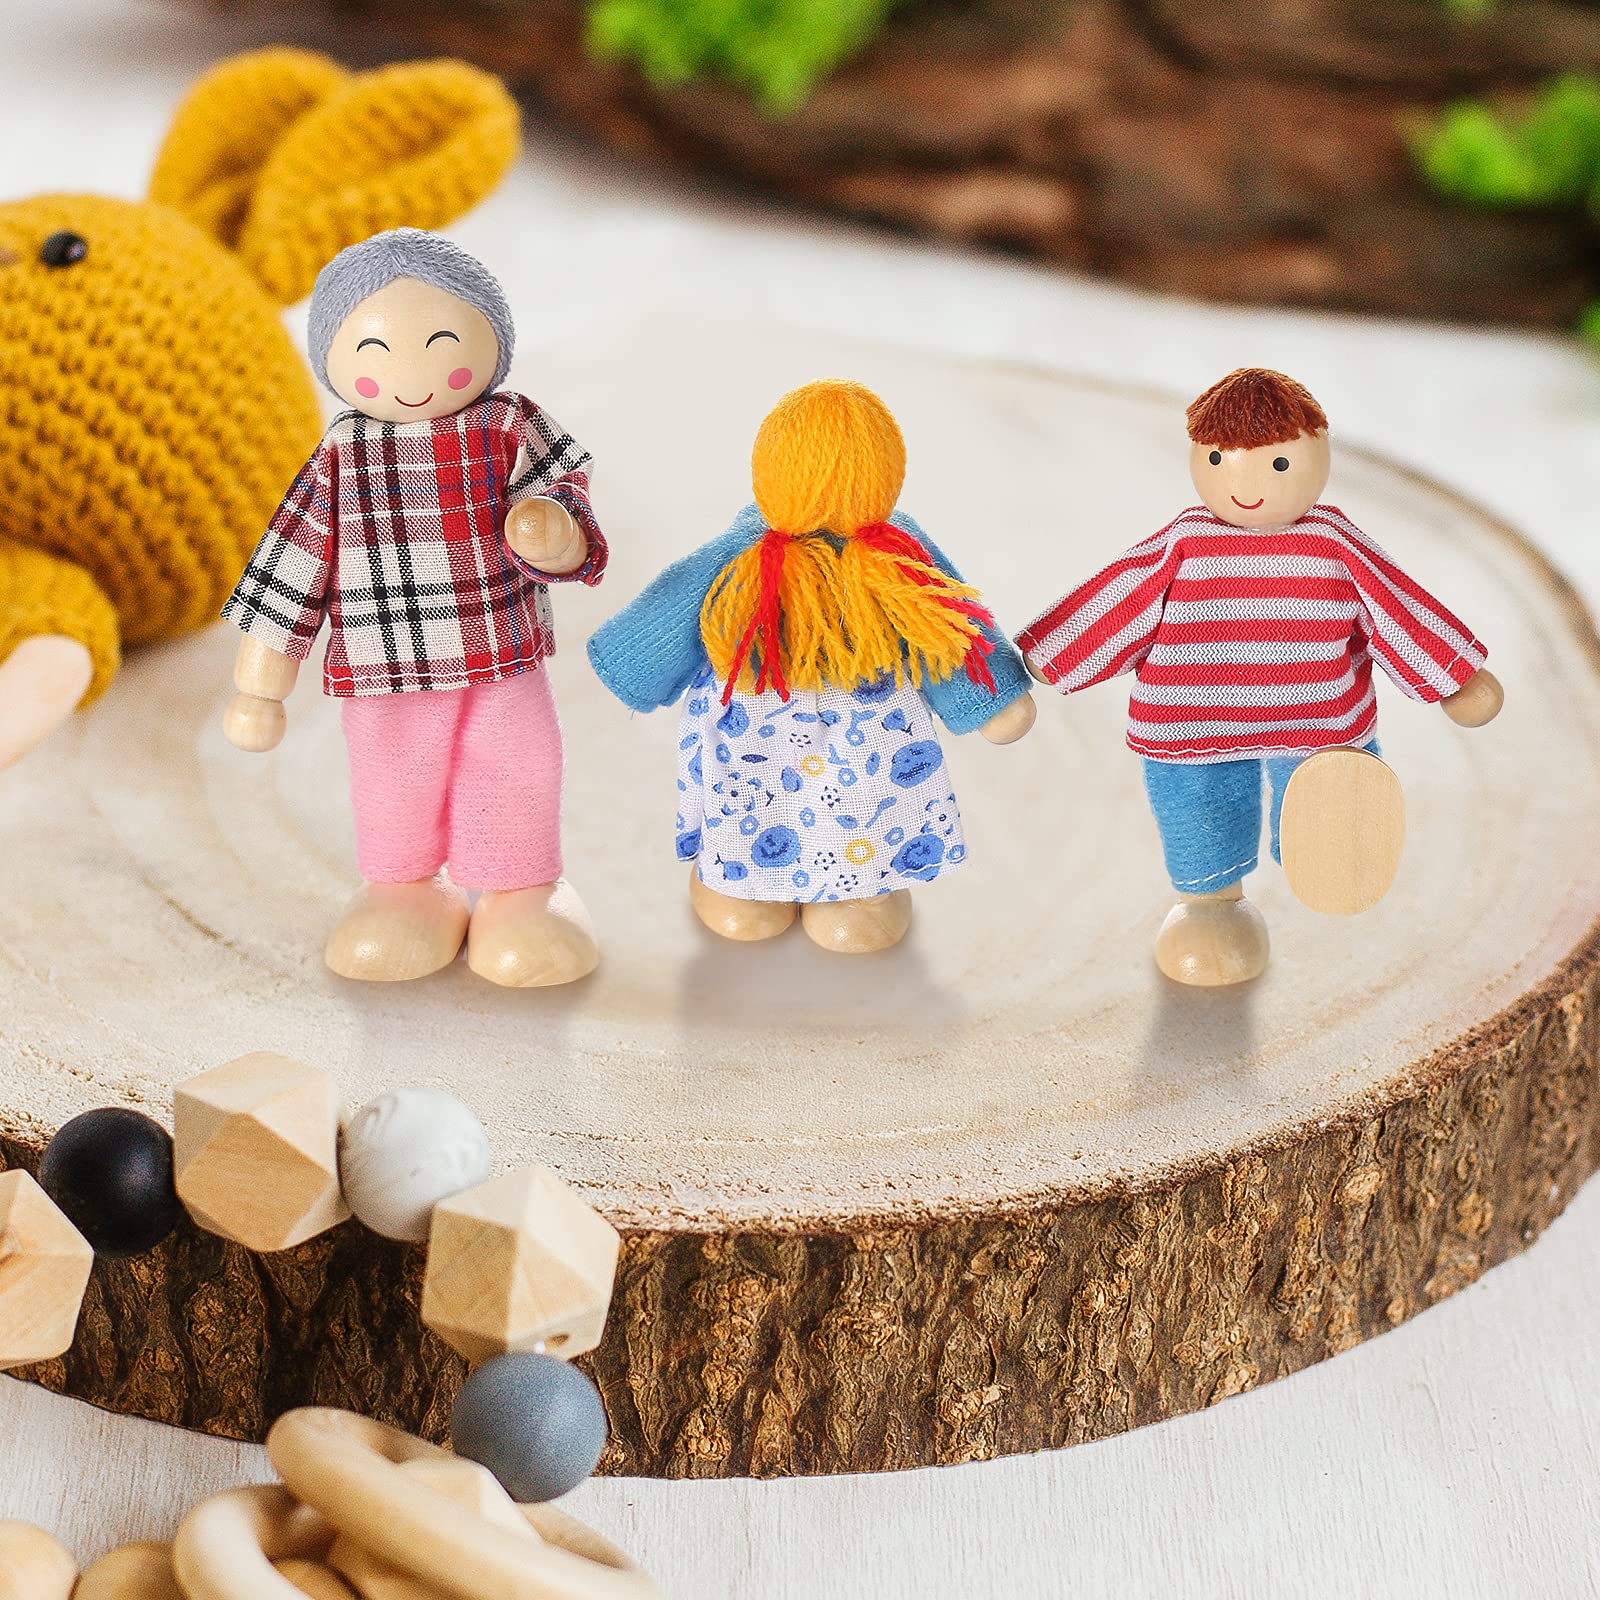 Wooden Doll House People of 8 Figures, Dolls Family Set for Girls Toddler Kids Dollhouse Accessories Toy